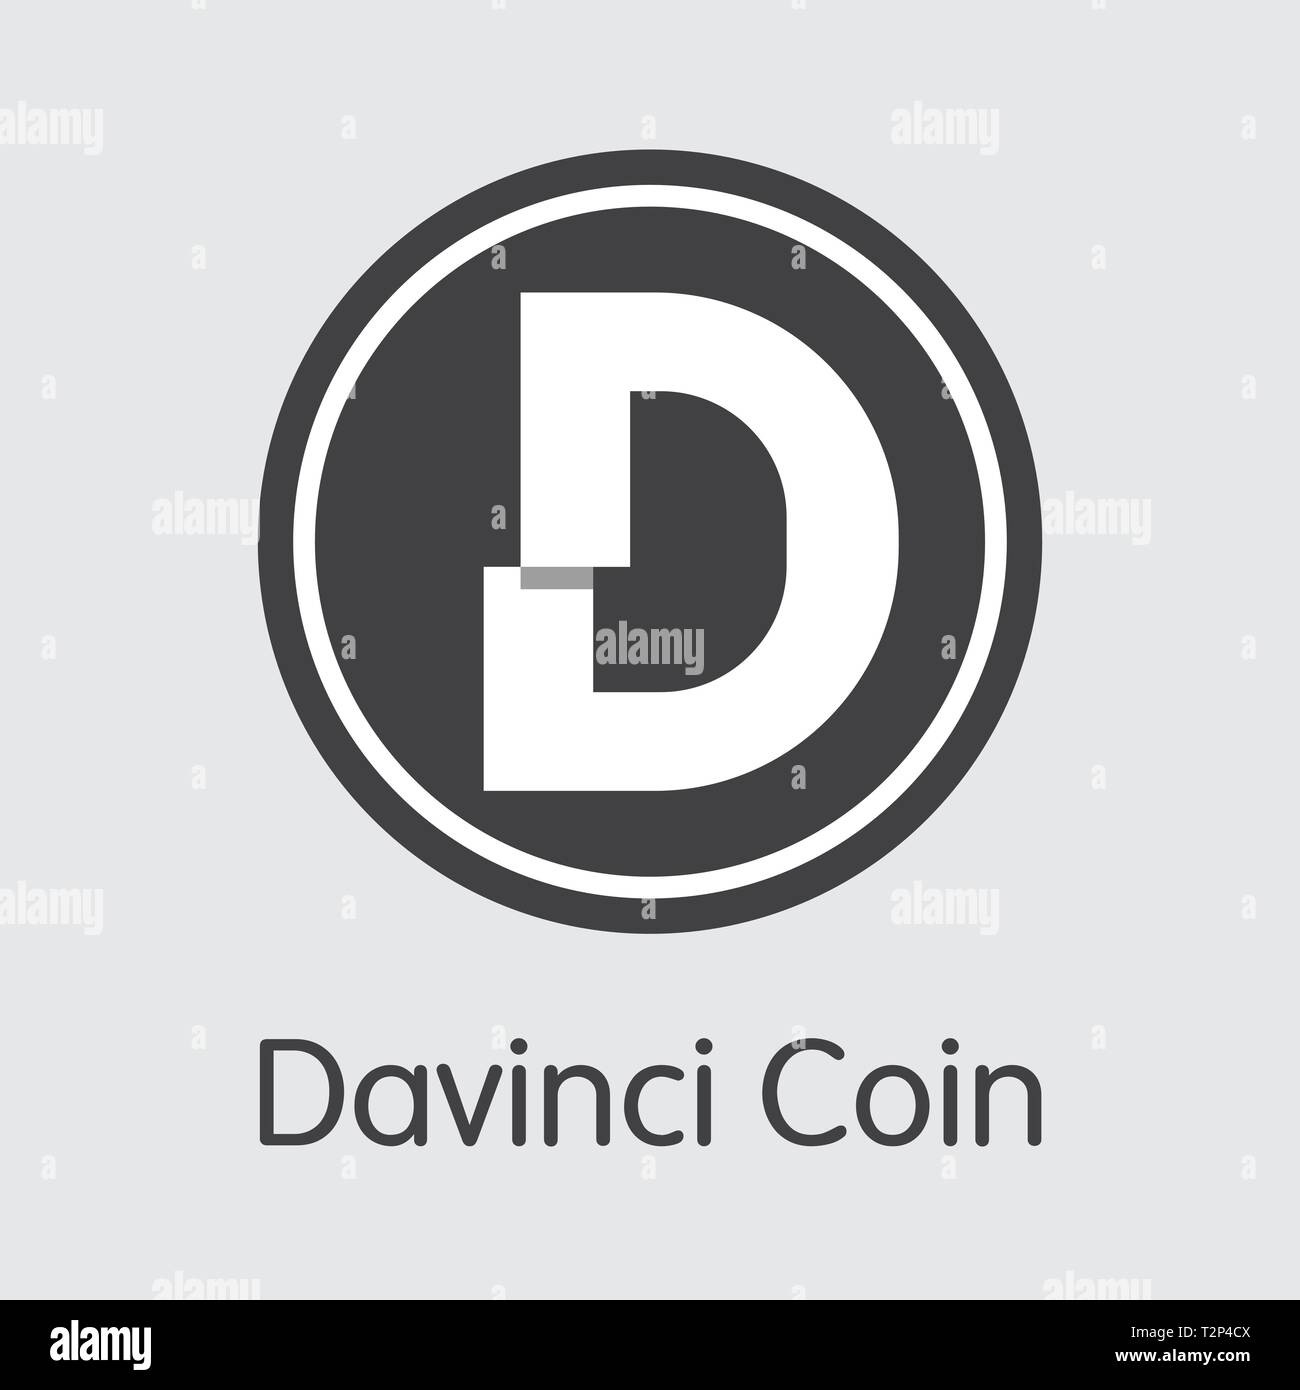 DAC - Davinci Coin. The Icon or Emblem of Money, Market Emblem, ICOs Coins and Tokens Icon. Stock Vector